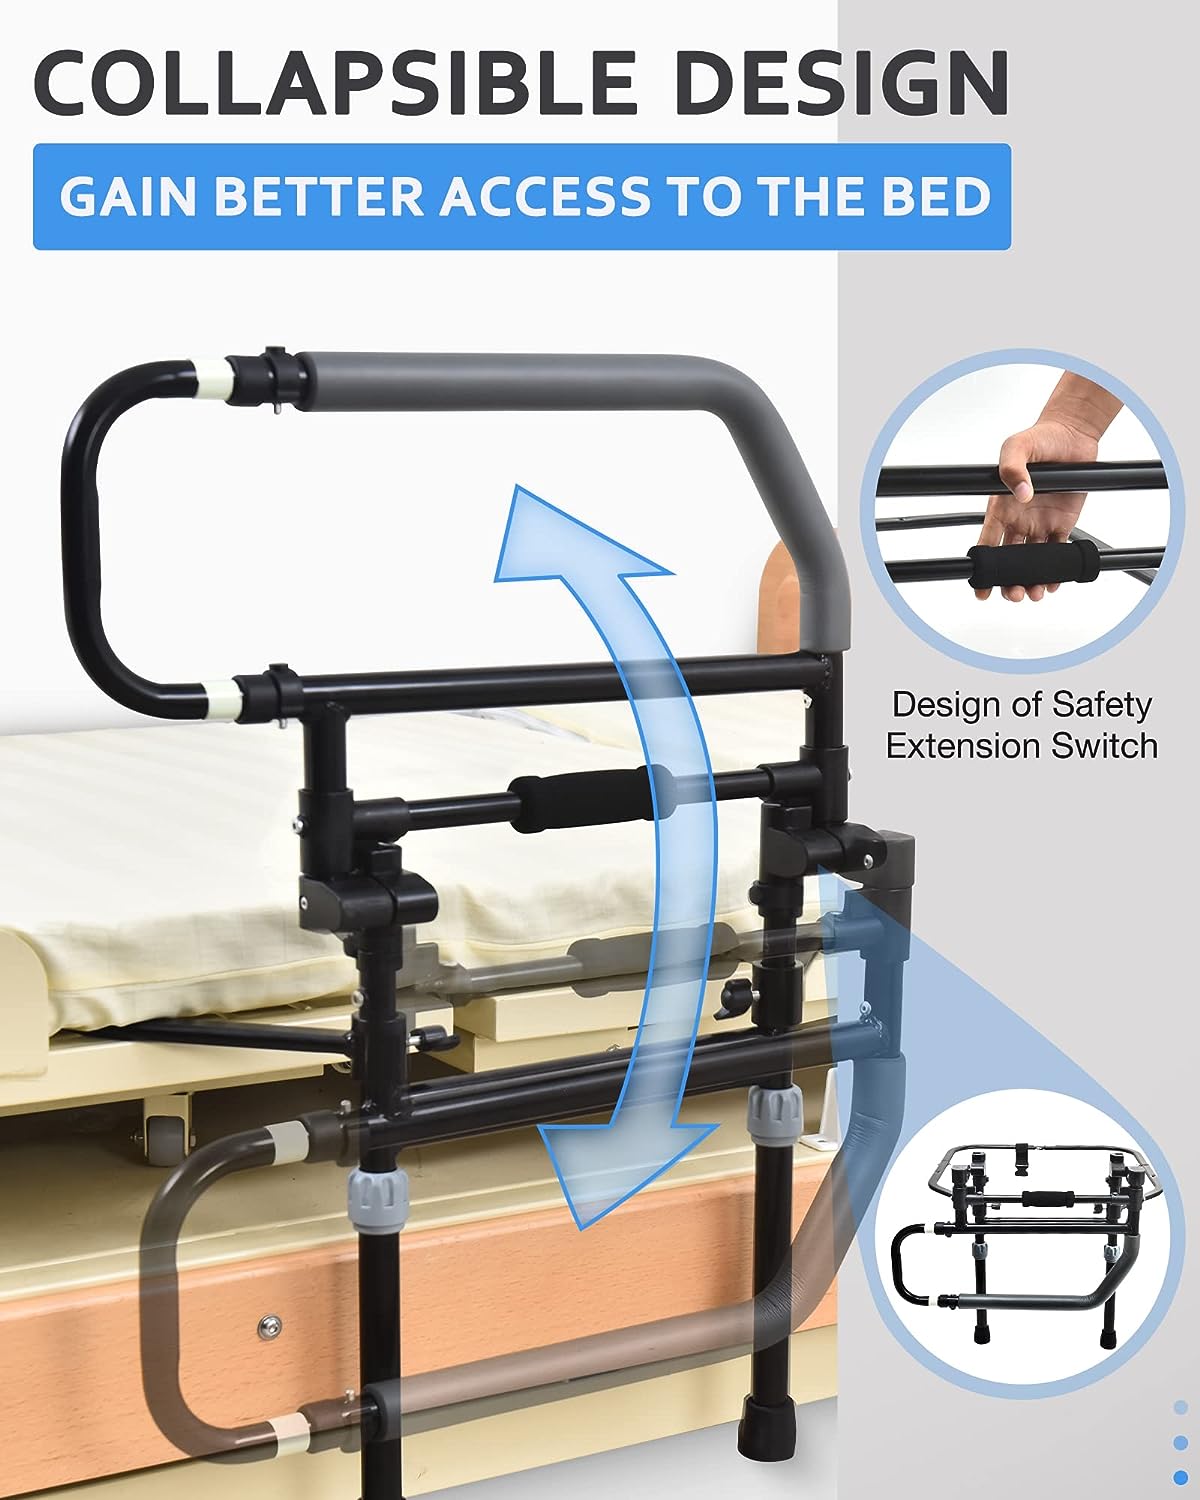 Sangohe Bed Rail for Elderly - Heavy Duty Bed Rail - Bed Rail for Elderly People Falling Out of Bed - Foldable Bed Assist Handle - Bed Rail for Senior, 504E